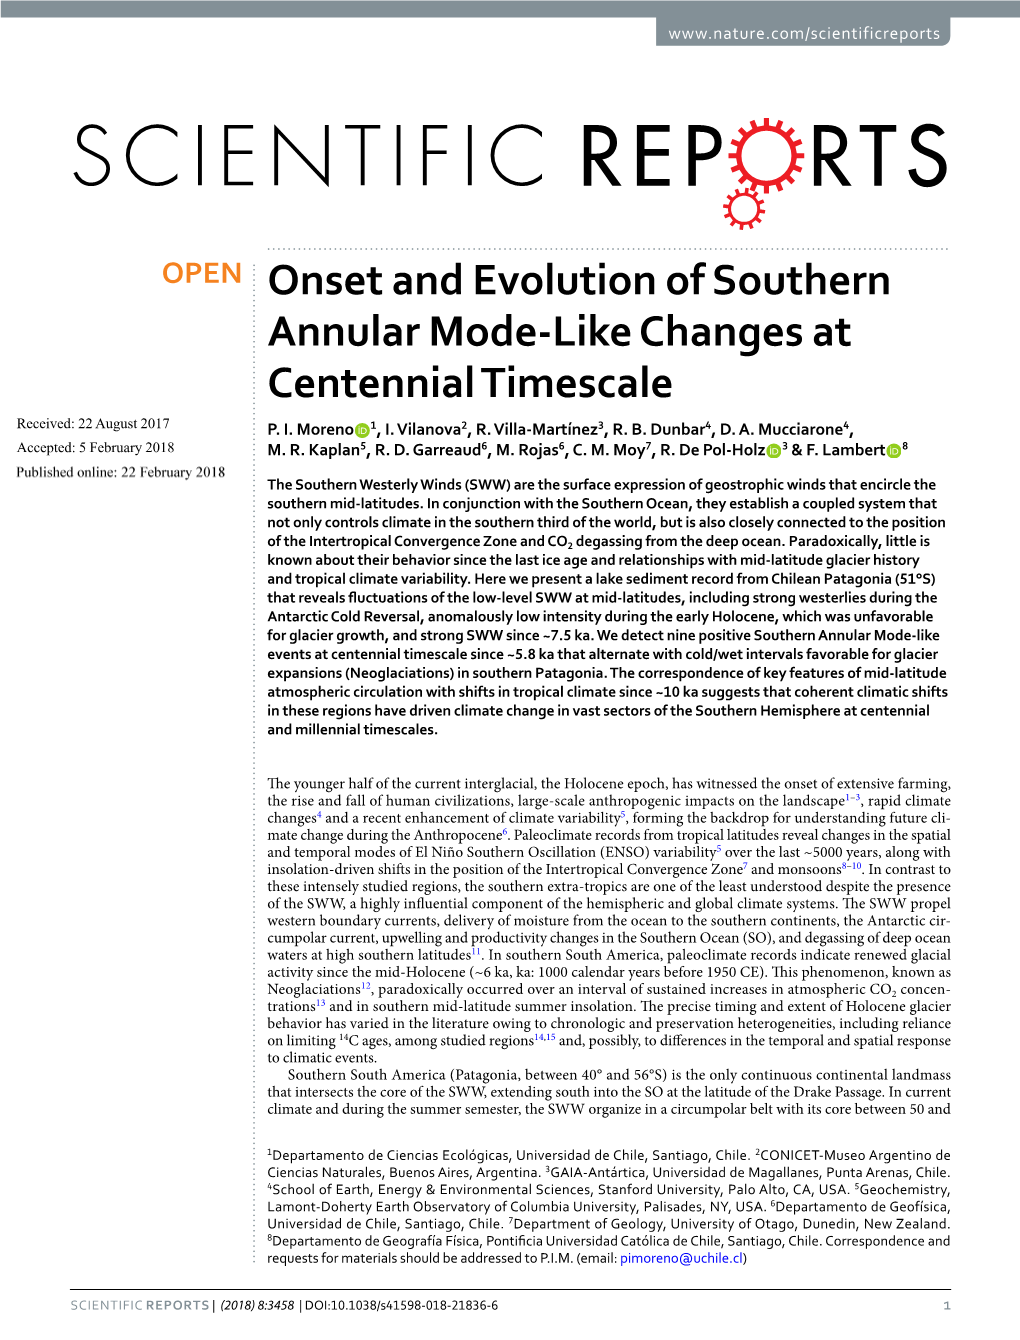 Onset and Evolution of Southern Annular Mode-Like Changes at Centennial Timescale Received: 22 August 2017 P